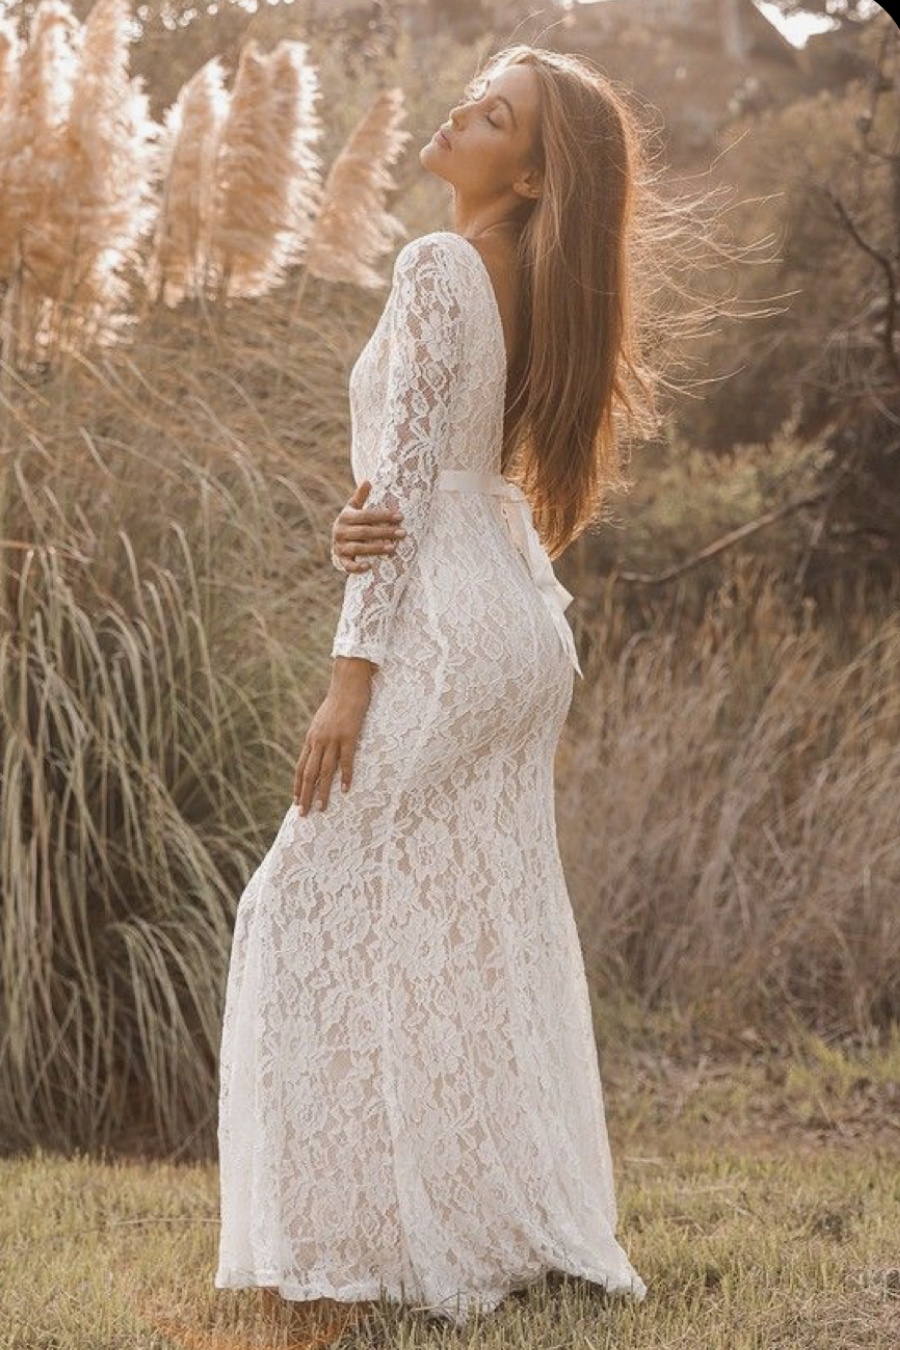 Lace Full Sleeves Bride Dresses with Boat Neck